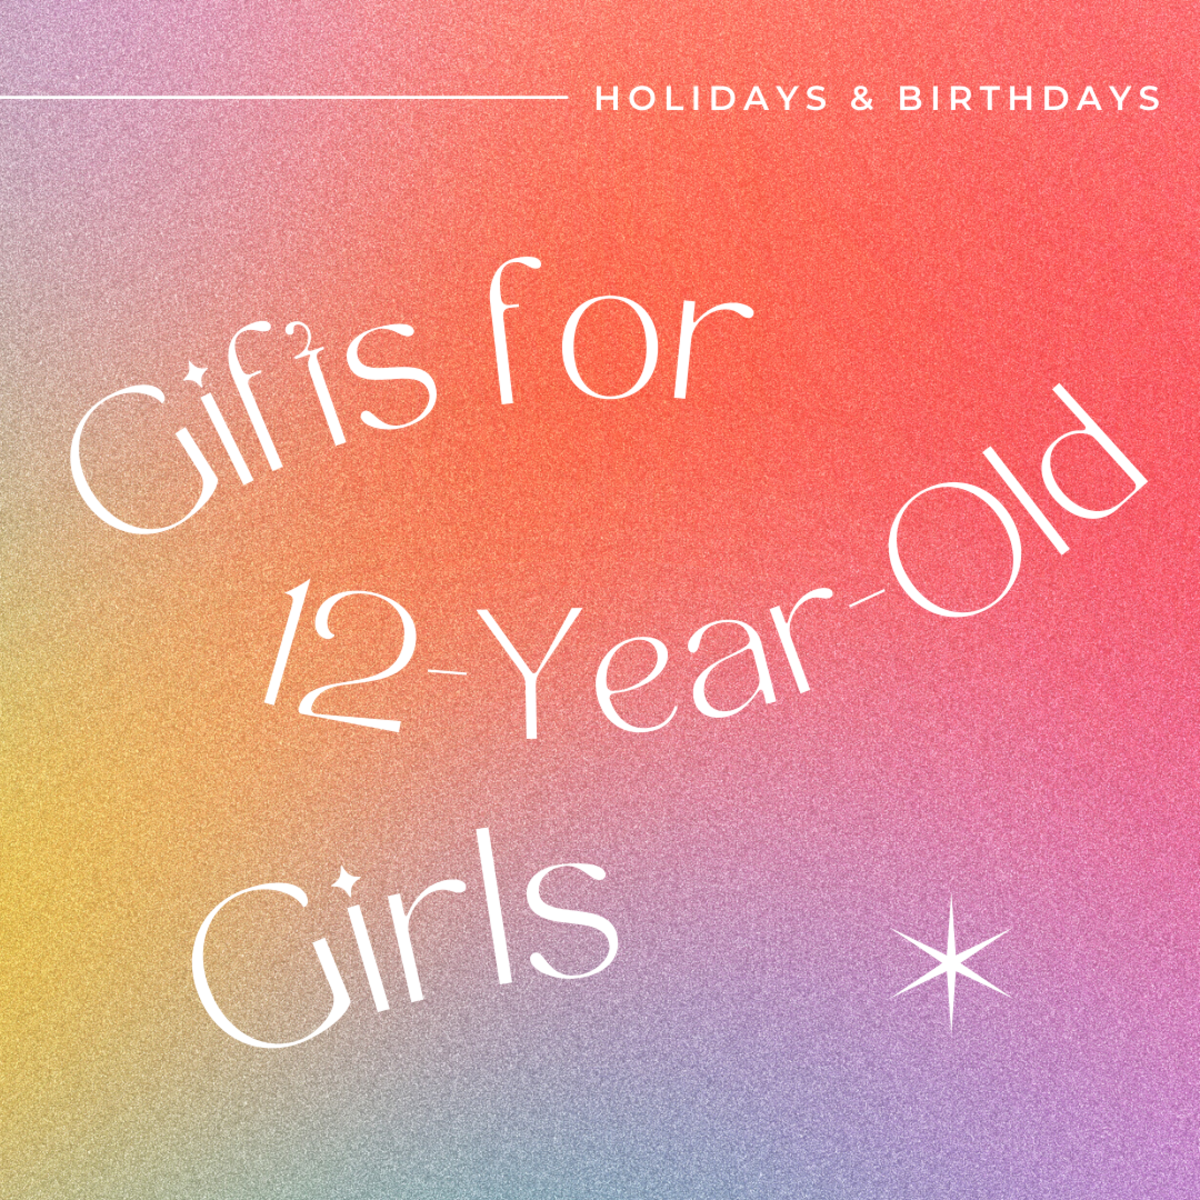 Best Gifts for 12-Year-Old Girls (Christmas, Birthday, Hanukkah, or Just Because)